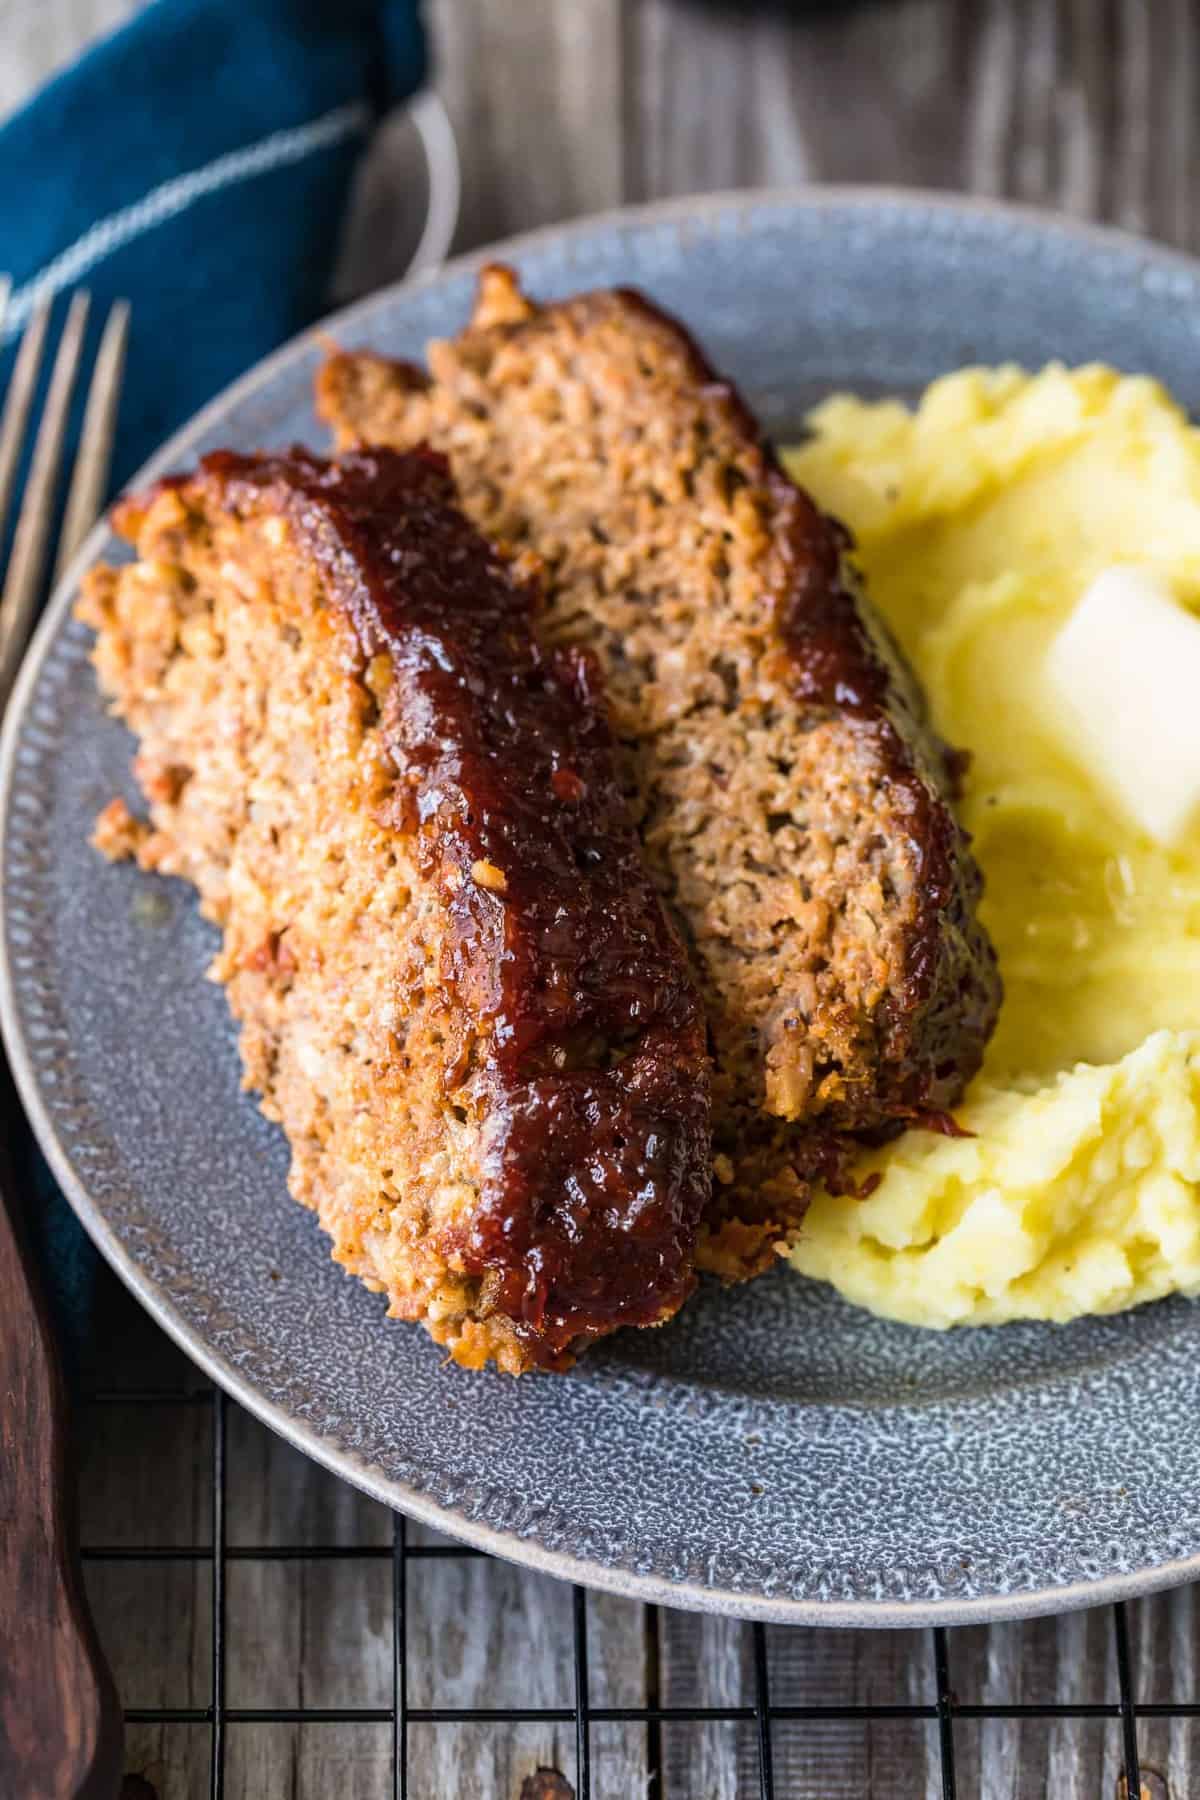 Meatloaf served on a blue plate with mashed potatoes